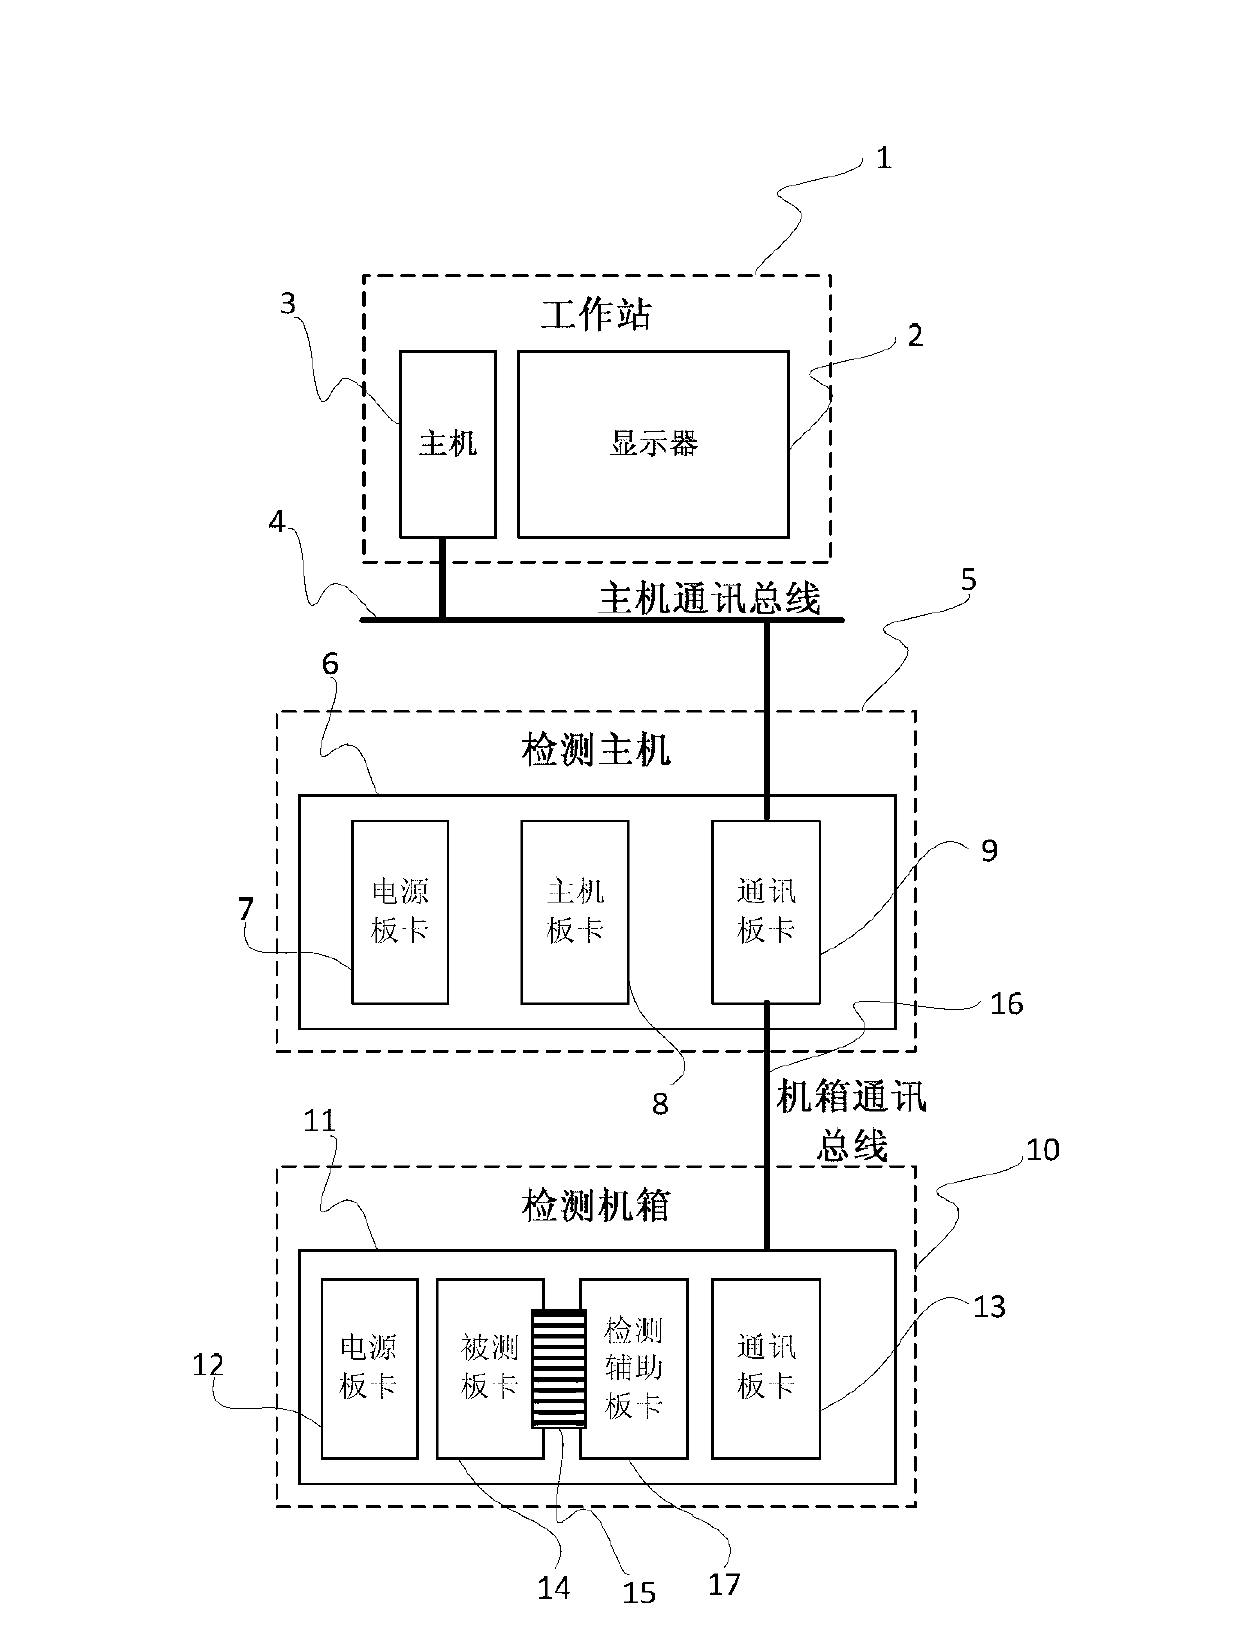 Automatic board card detecting device of direct current power transmission control protective system